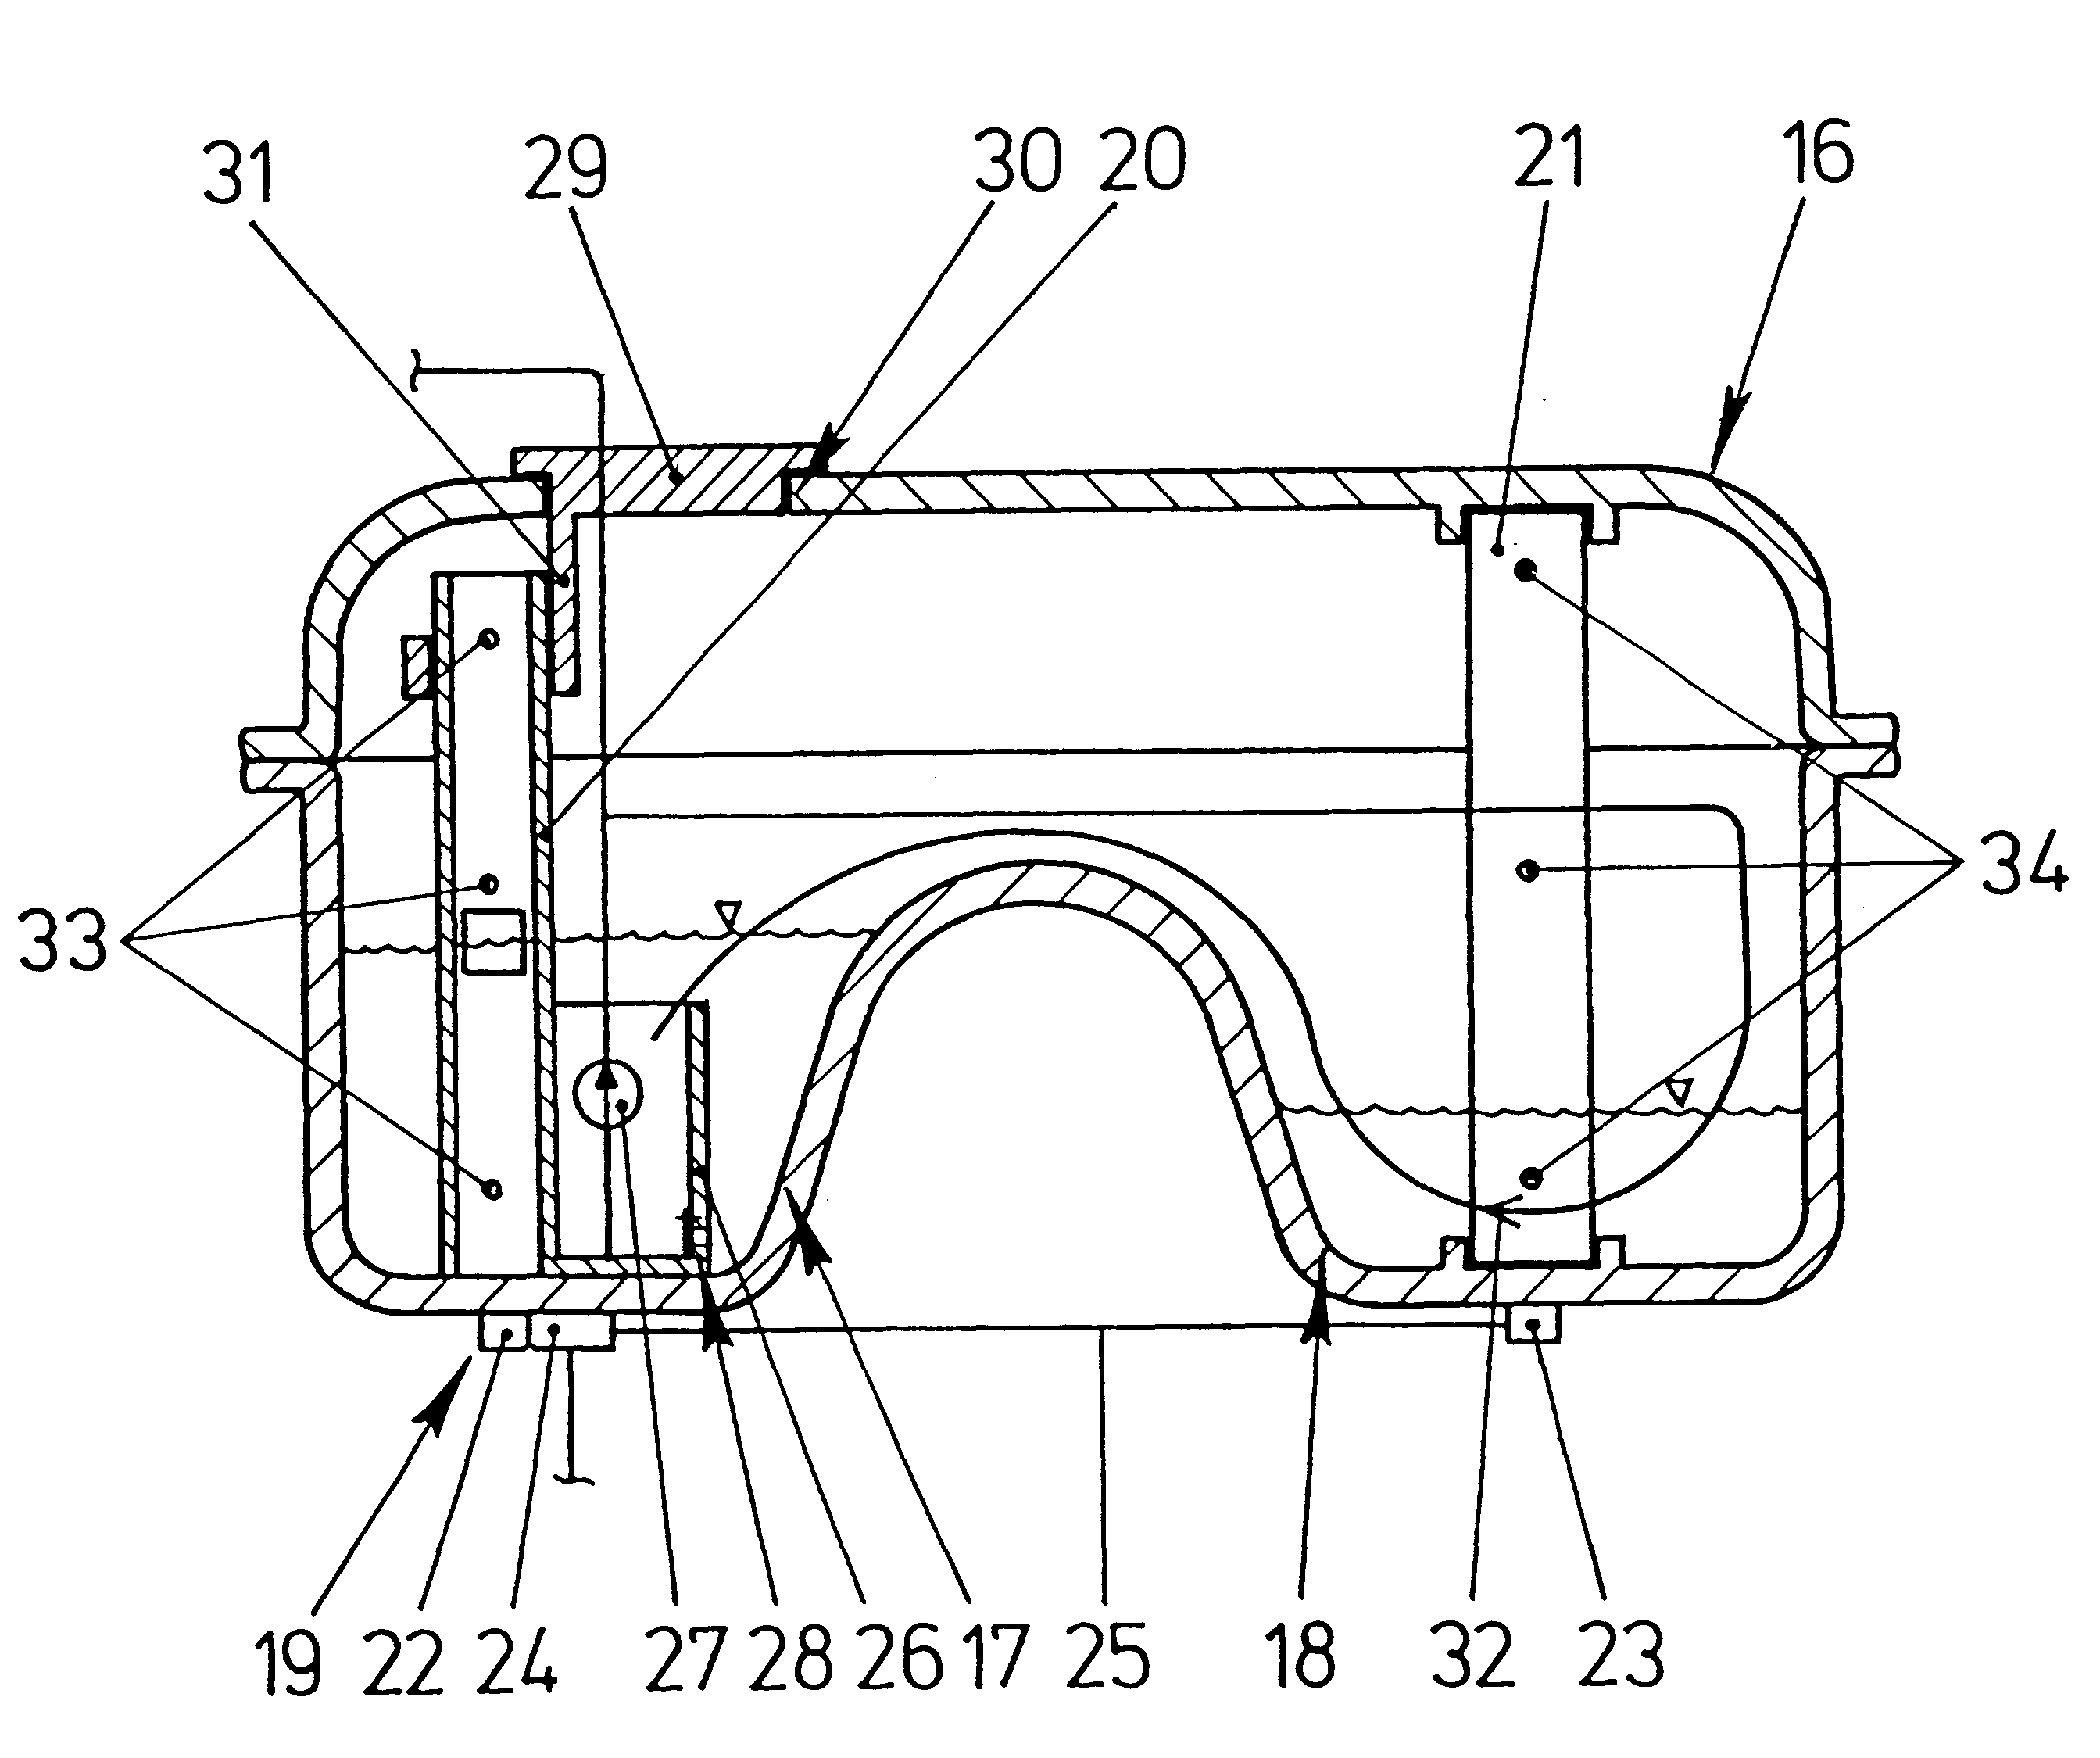 Device for measuring a fill level of a liquid in a container